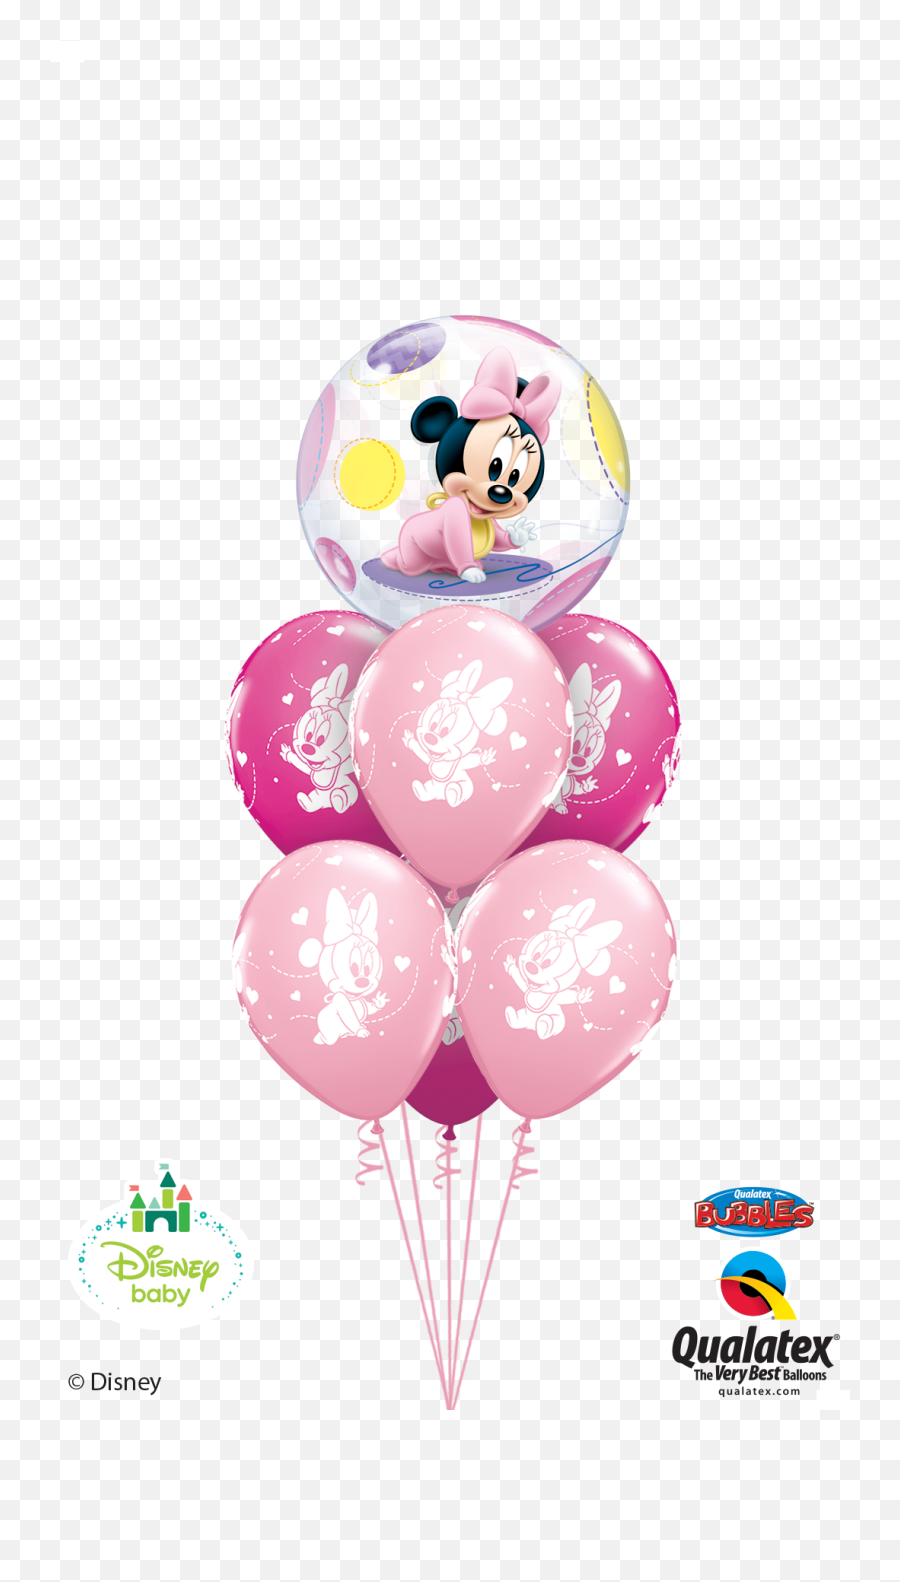 Balloons Transparent Minnie Mouse - Minnie Mouse Balloon Png Baby Minnie Mouse Balloons,Balloons Transparent